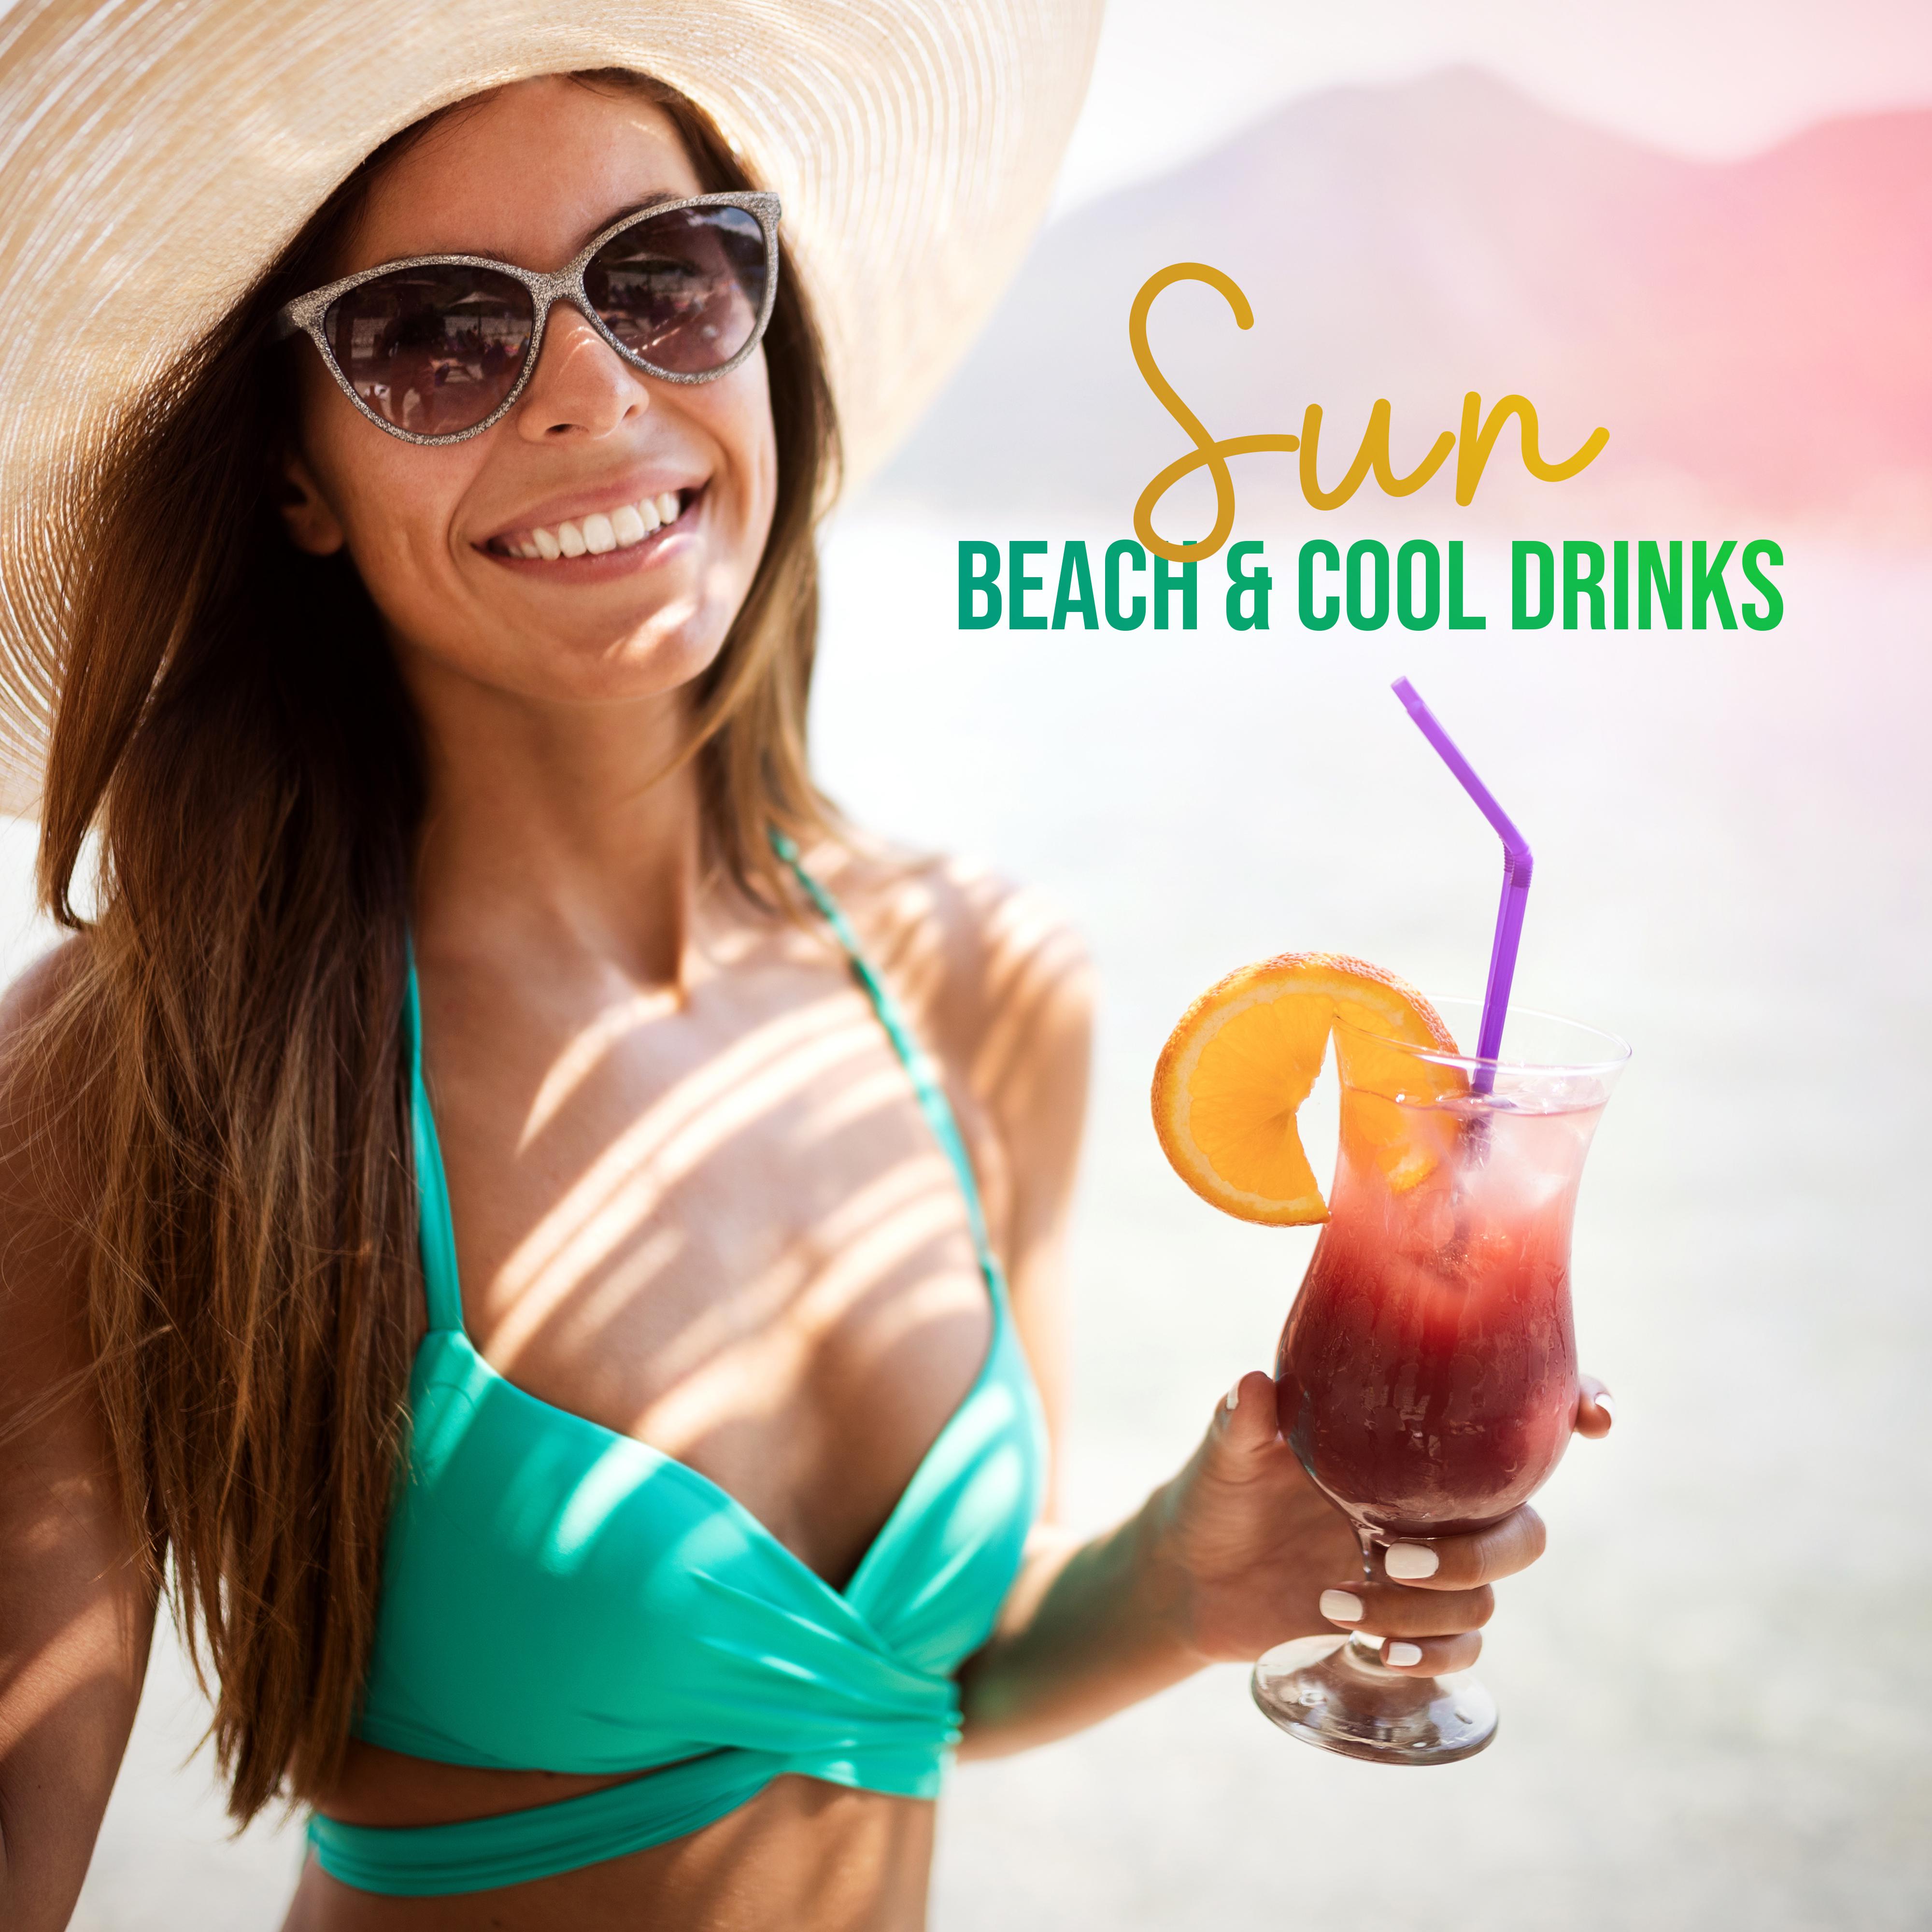 Sun, Beach & Cool Drinks: 2019 Chillout Electronic Music Compilation Perfect for Summer Relaxation on the Beach, Holiday Slow Ambient Songs, Sunny Vacation Celebration Mix